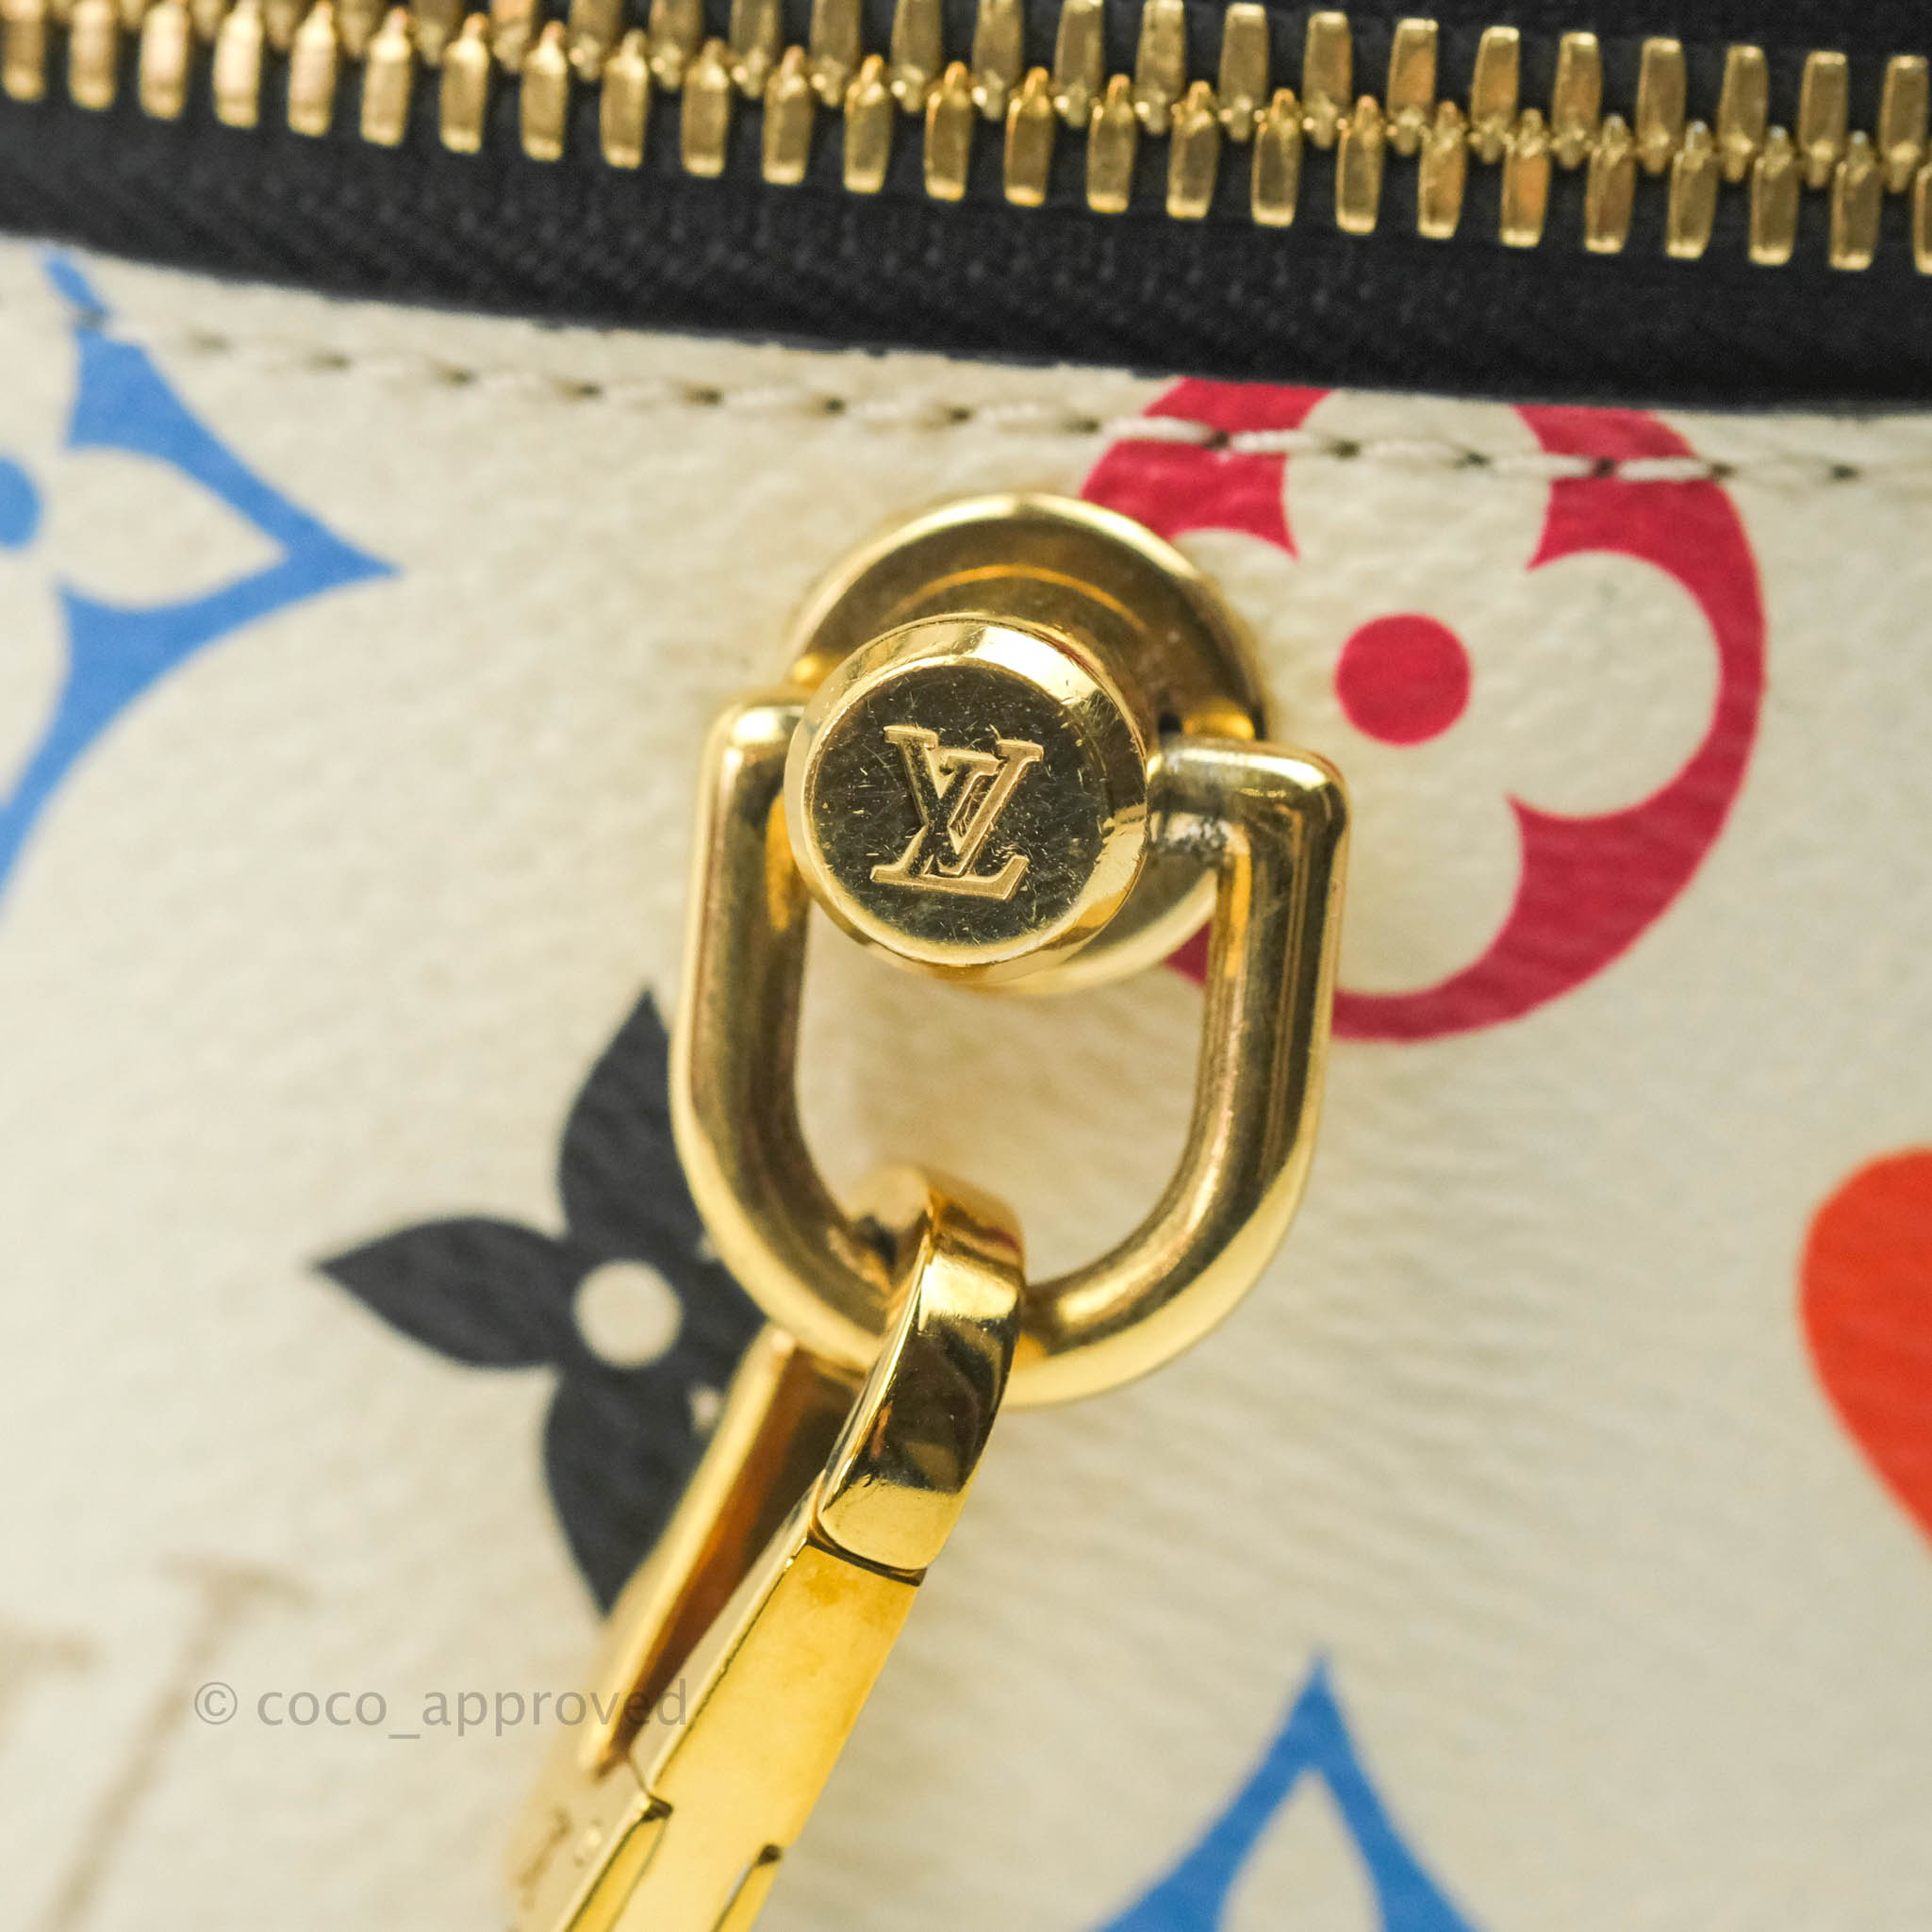 Louis Vuitton Game On Vanity PM White Heart Monogram – Coco Approved Studio